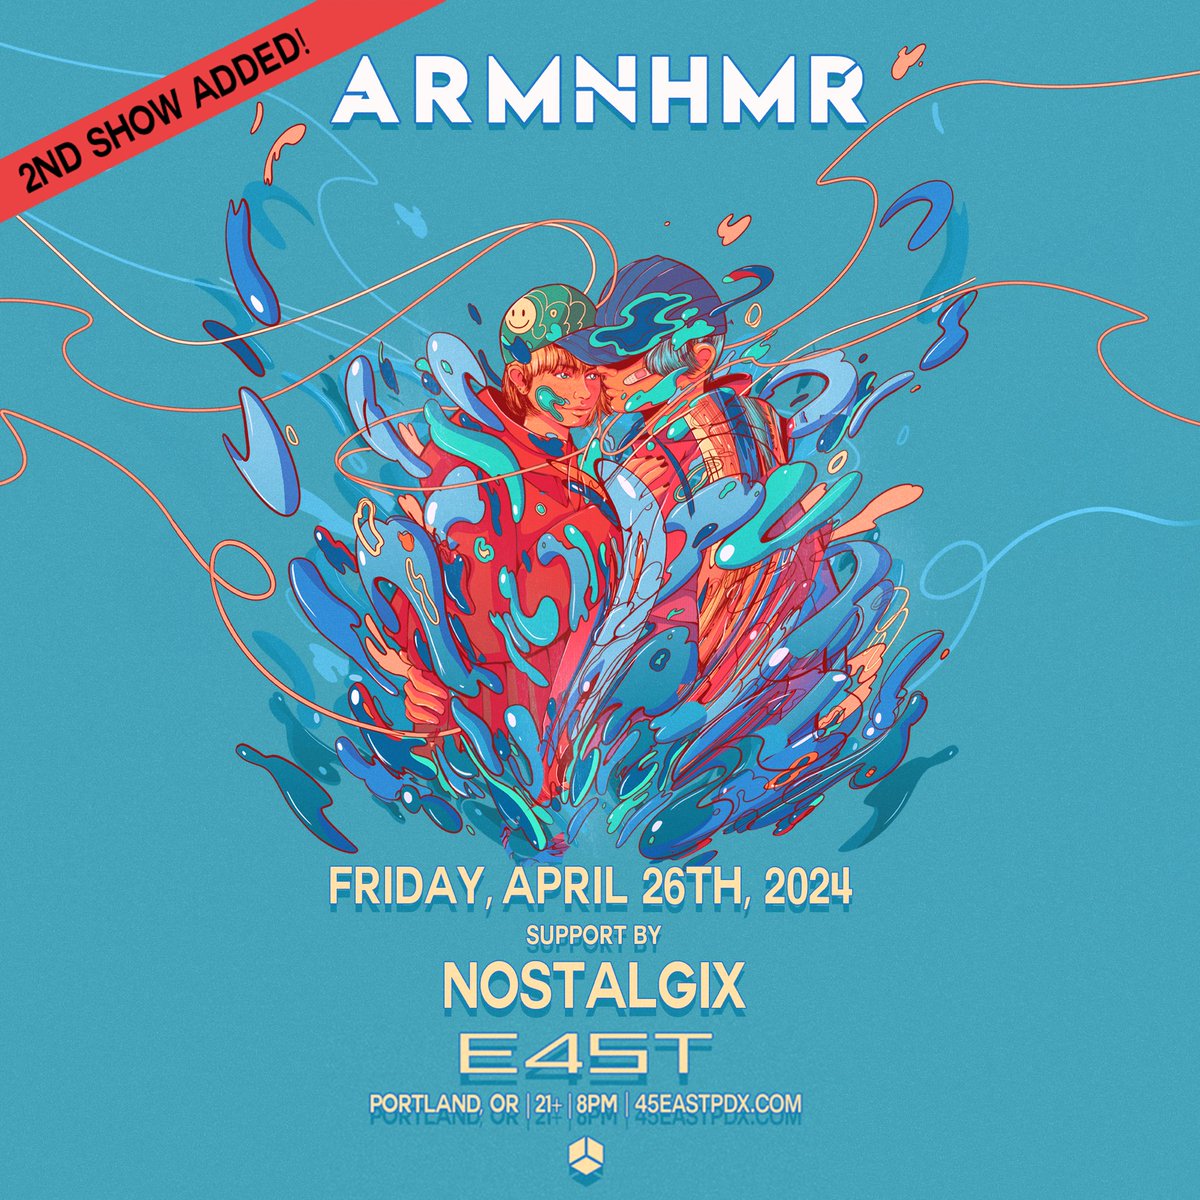 𝐇𝐌𝐑𝐅𝐀𝐌!! 🔥 Due to popular demand, we've added a second date for @ARMNHMR & @nostalgixmusic on Friday, April 26th! 👏🏽